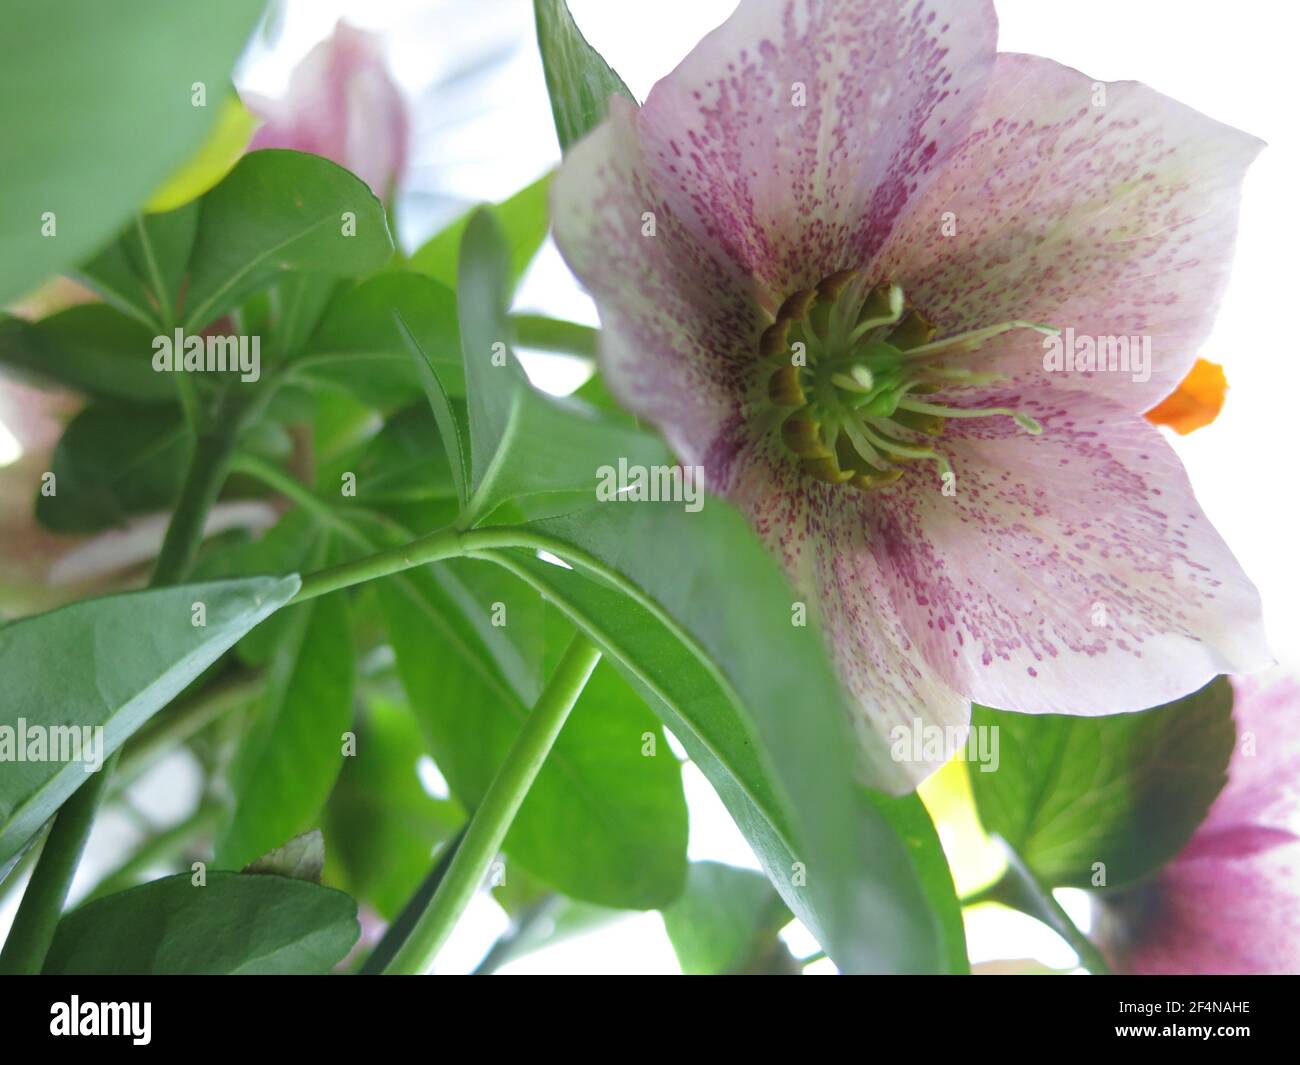 Botanical image with a close-up of the cup-shaped flower of a purple hellebore, backlit so the speckled pattern on the petals is clearly visible. Stock Photo